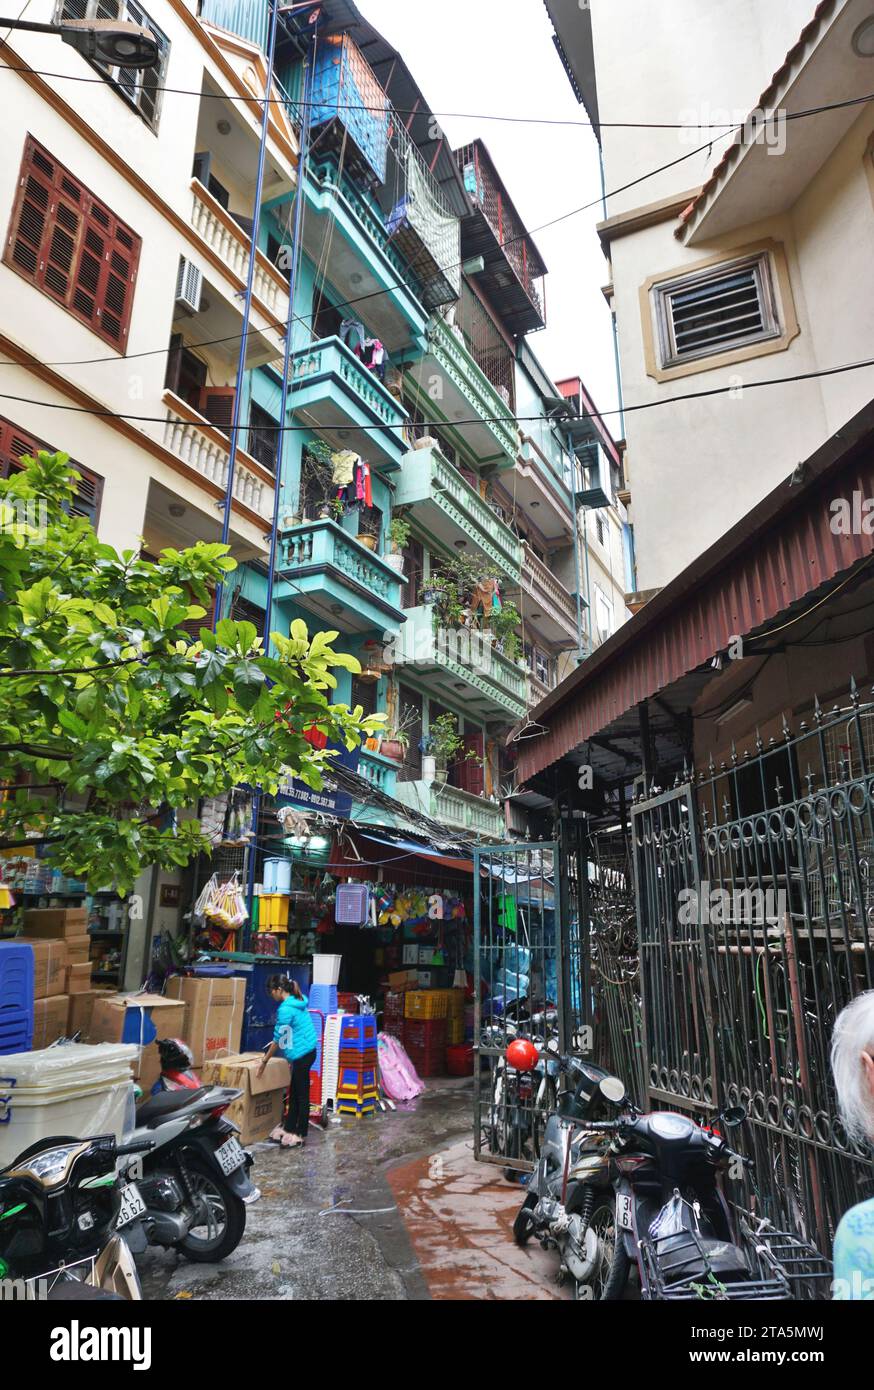 Multi-story apartment buildings line a narrow street in Hanoi, Vietnam. Shopfronts fill the ground level with motorcycle parking on the sidewalks Stock Photo